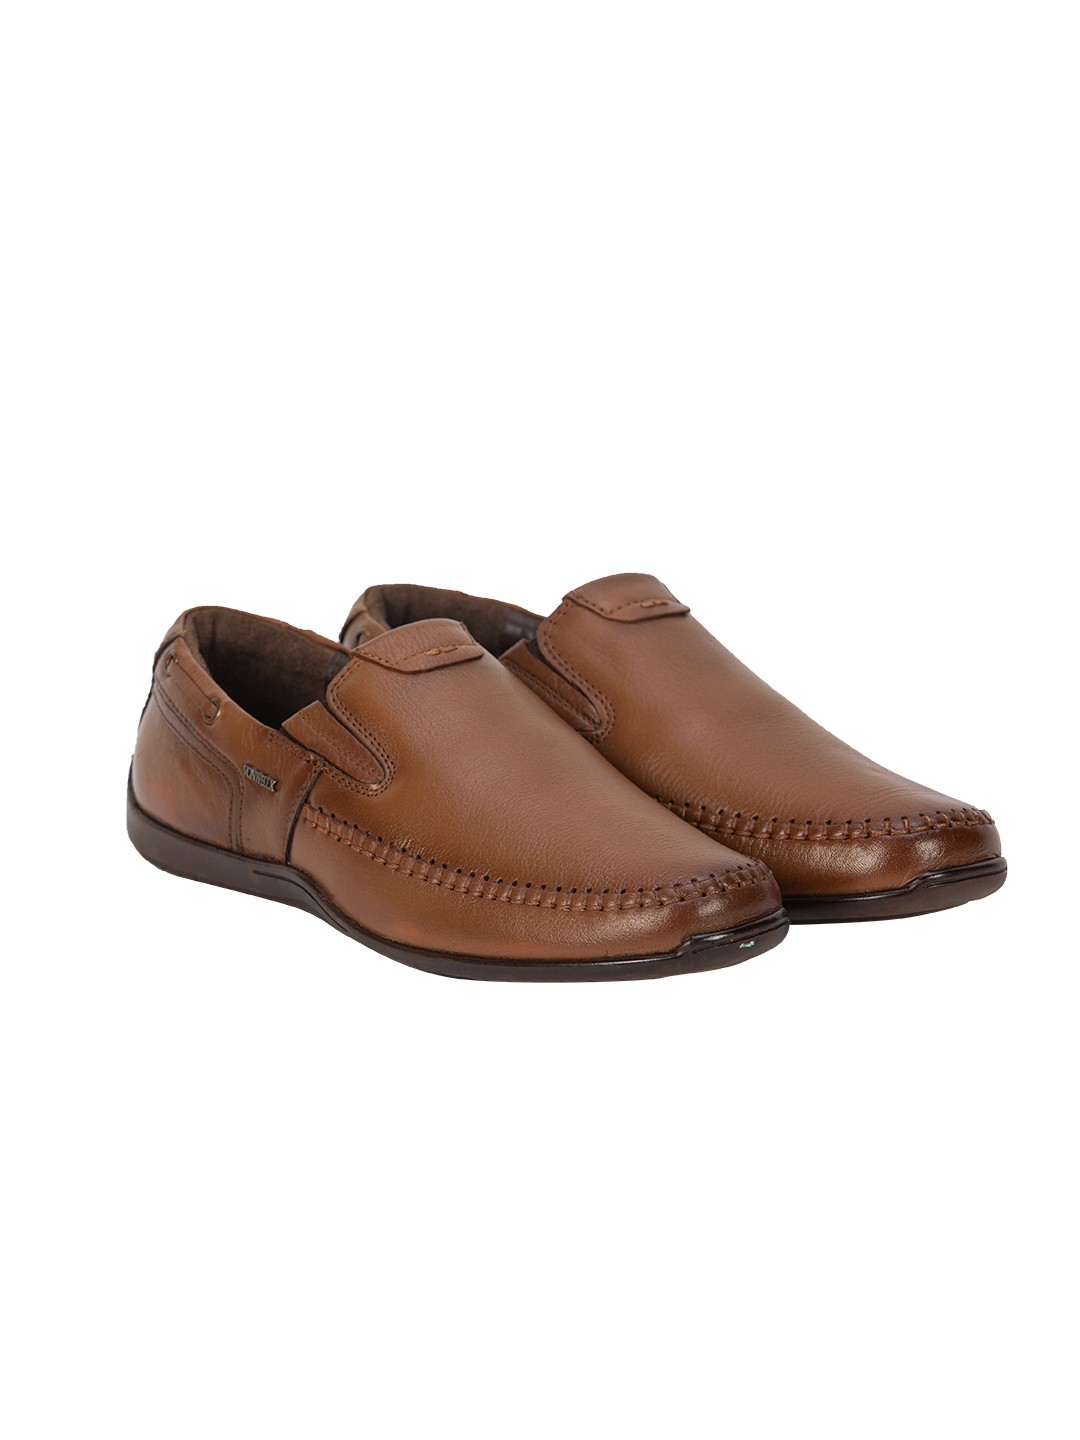 Buy Von Wellx Axel Casual Tan Shoes Online in Galle